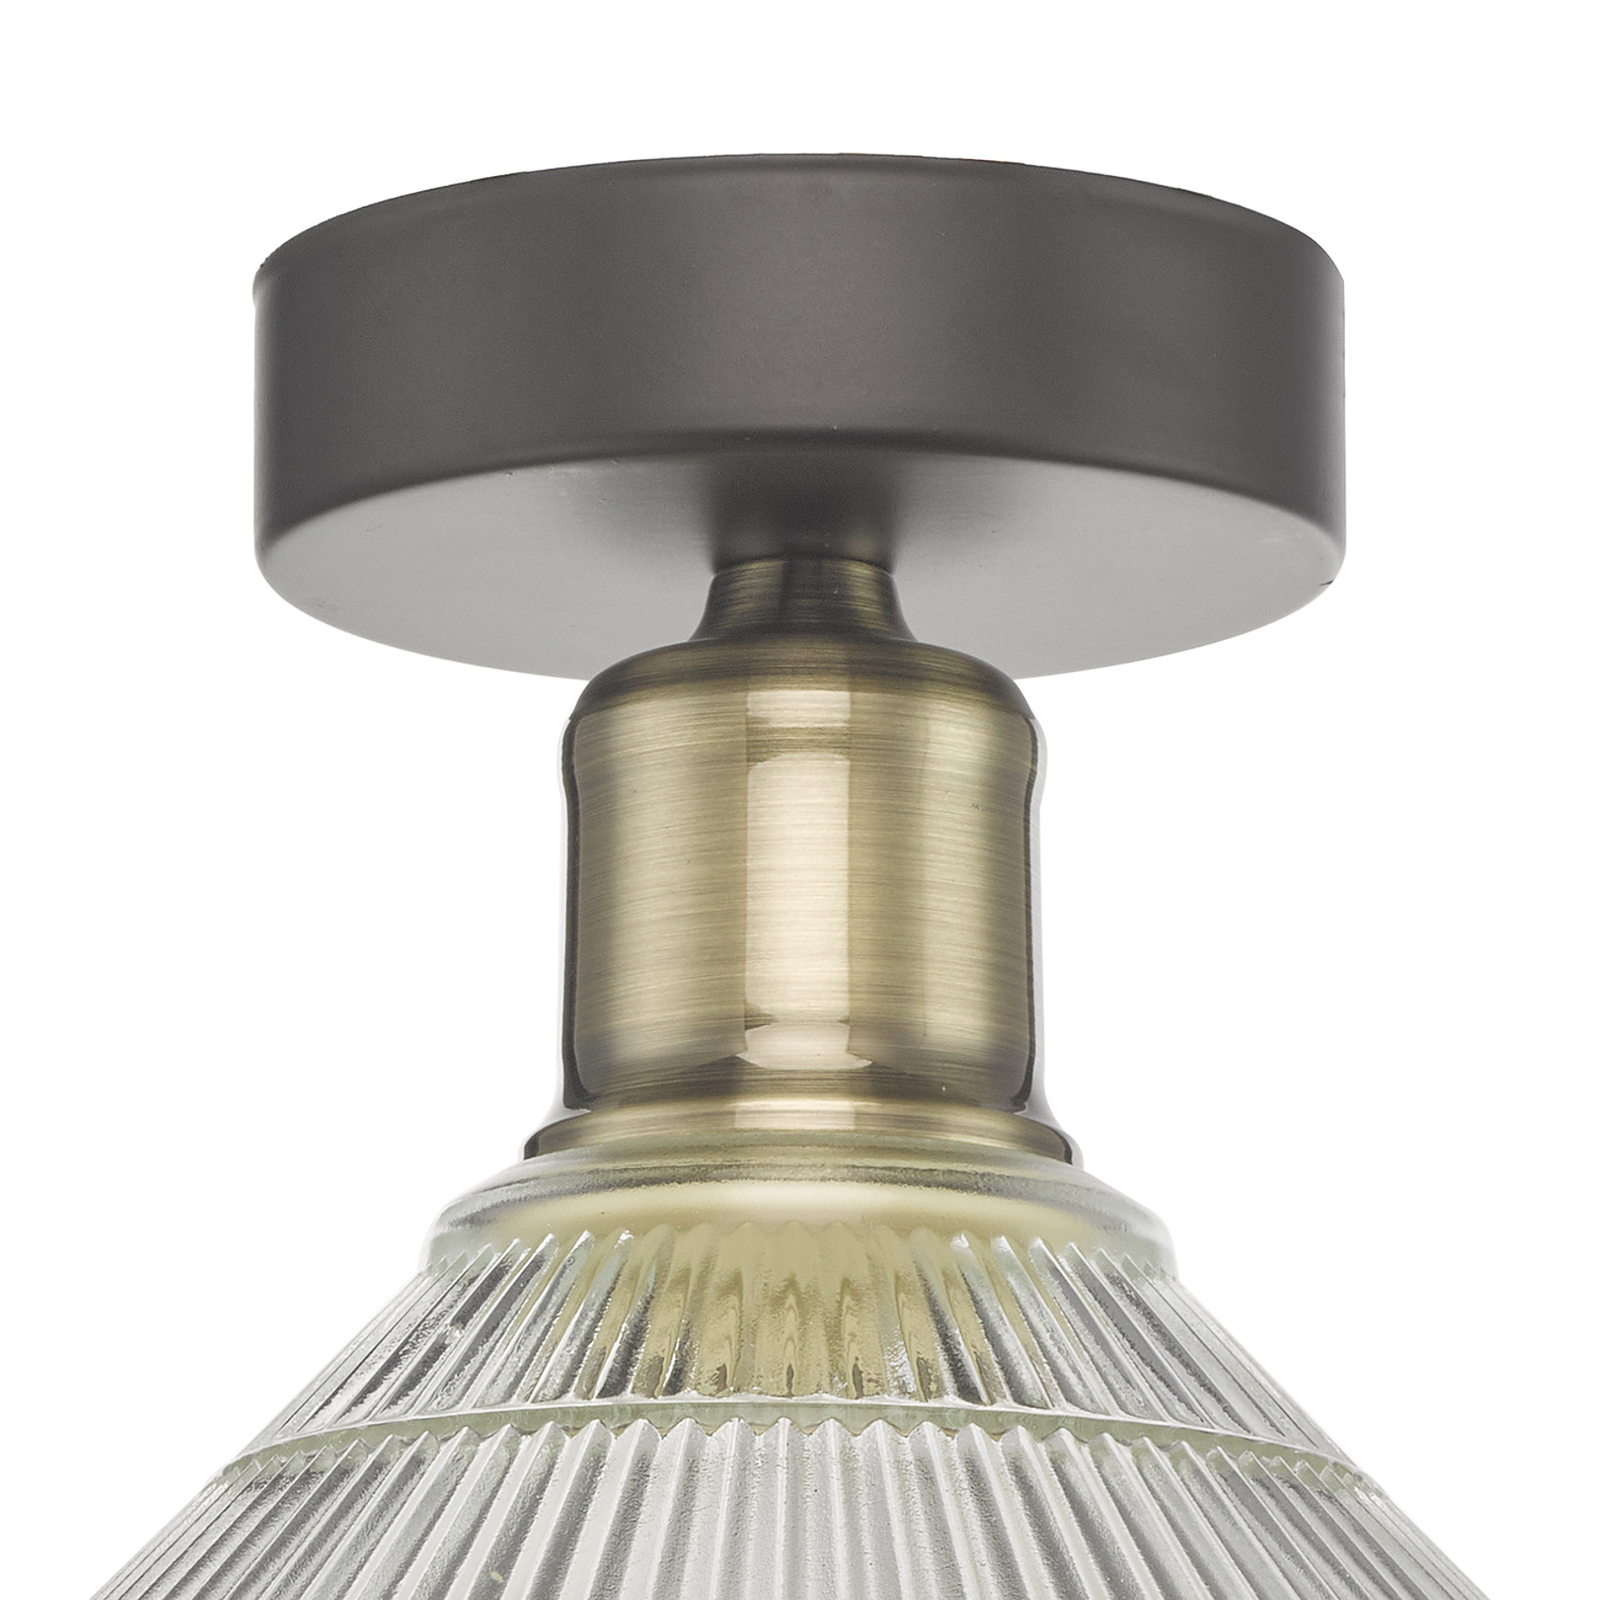 Boyd ceiling light with grooved glass shade